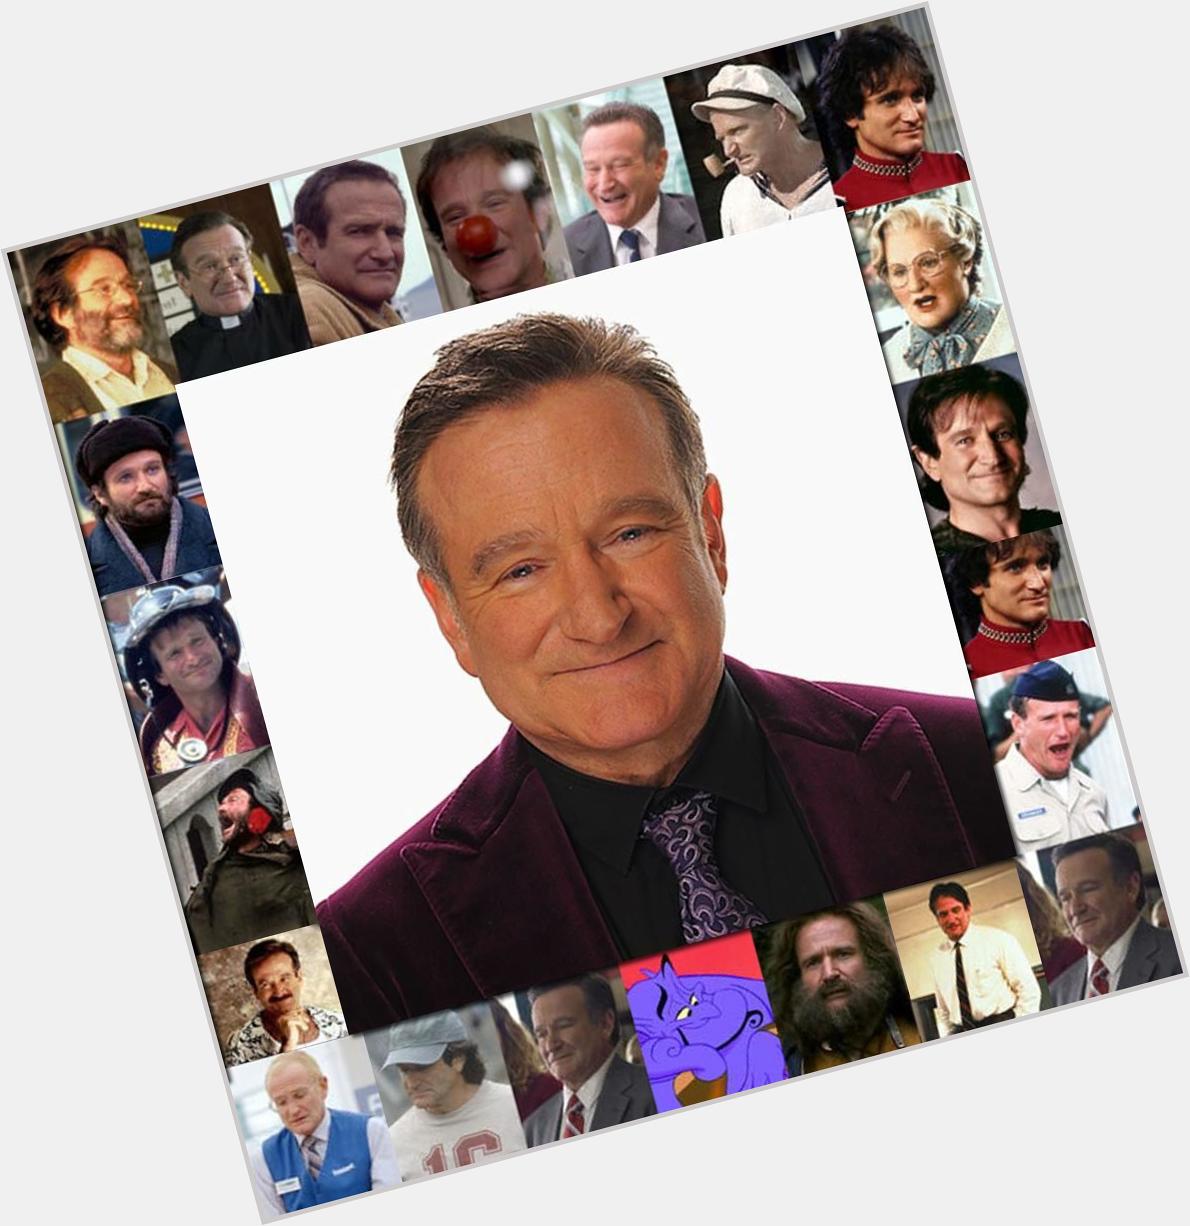 Robin Williams would have been 64 today. 
Thanks for all the laughs.
Happy birthday and RIP 